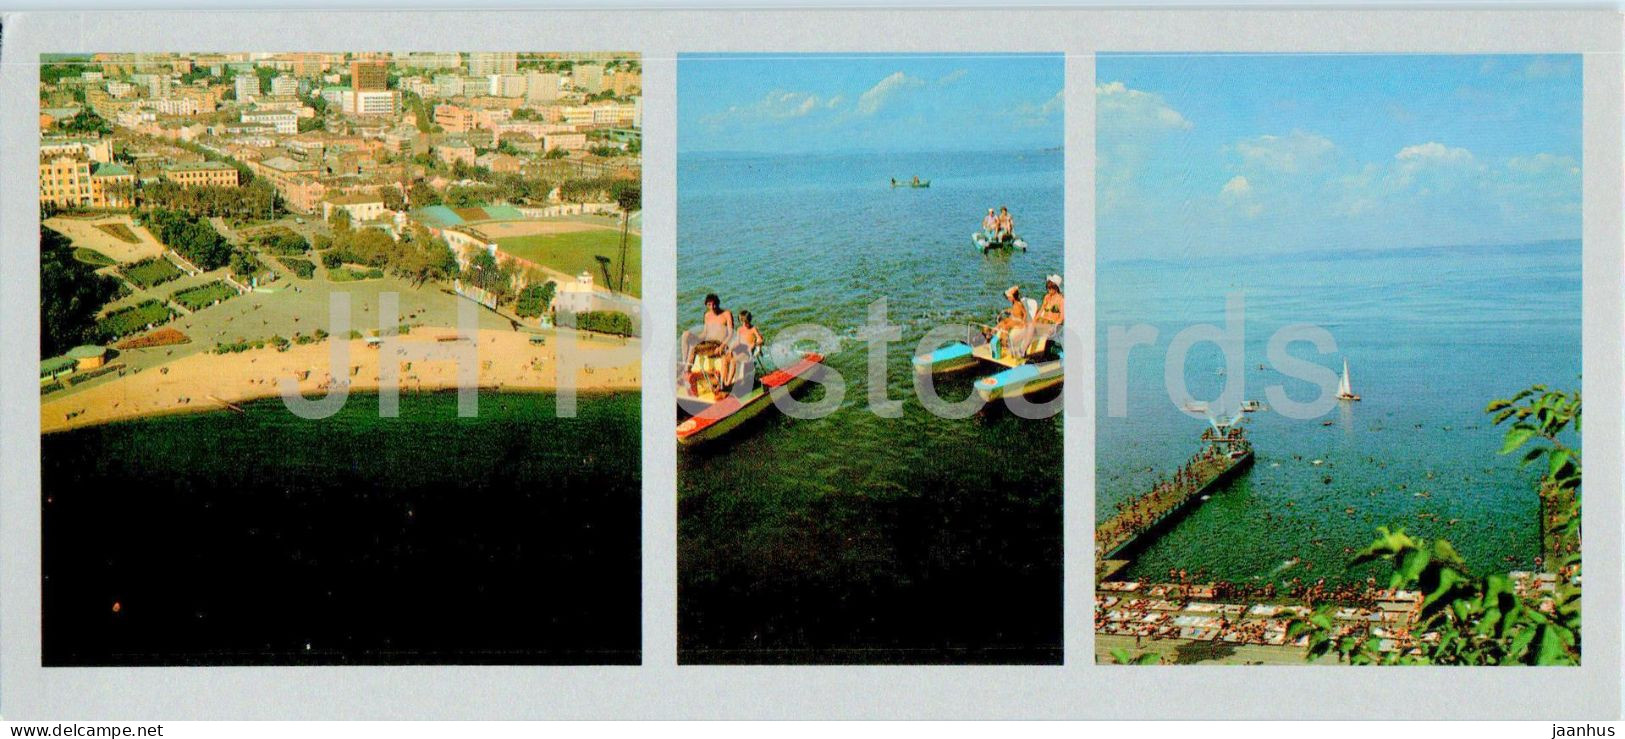 Bay Of The Peter The Great - Vladivostok - Amursky Bay - 1980 - Russia USSR - Unused - Russie